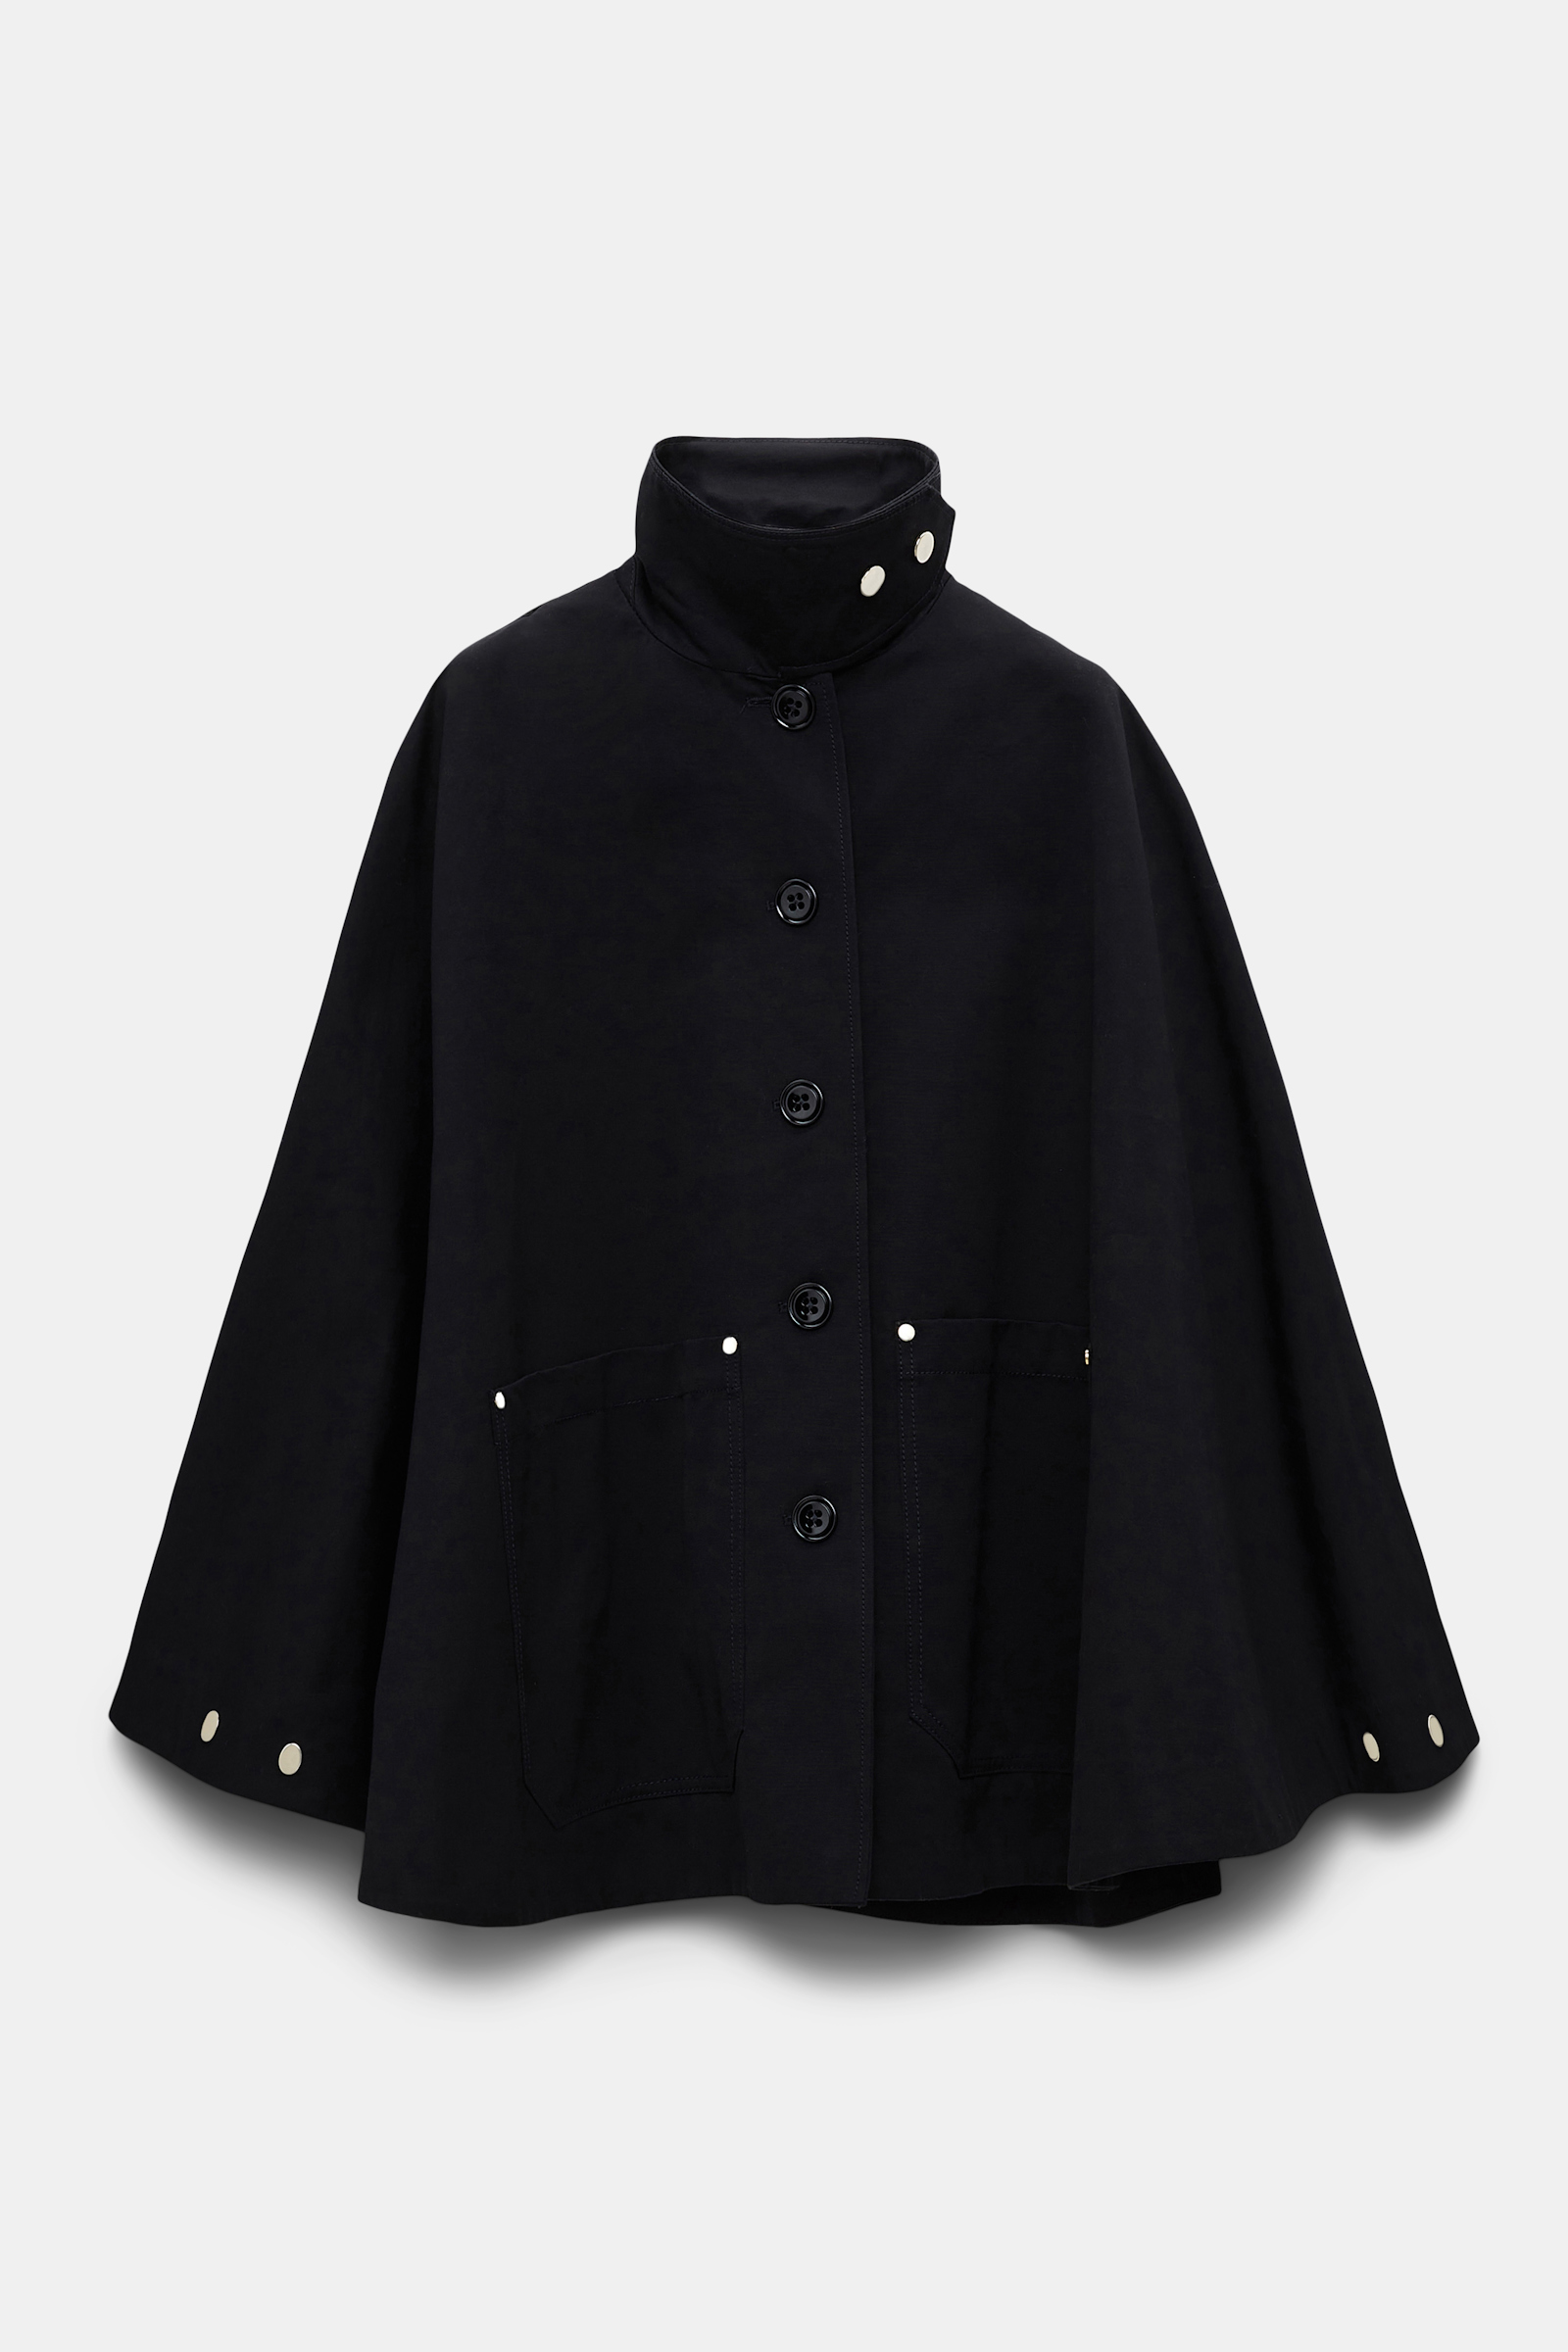 Dorothee Schumacher Cape with patch pockets pure black